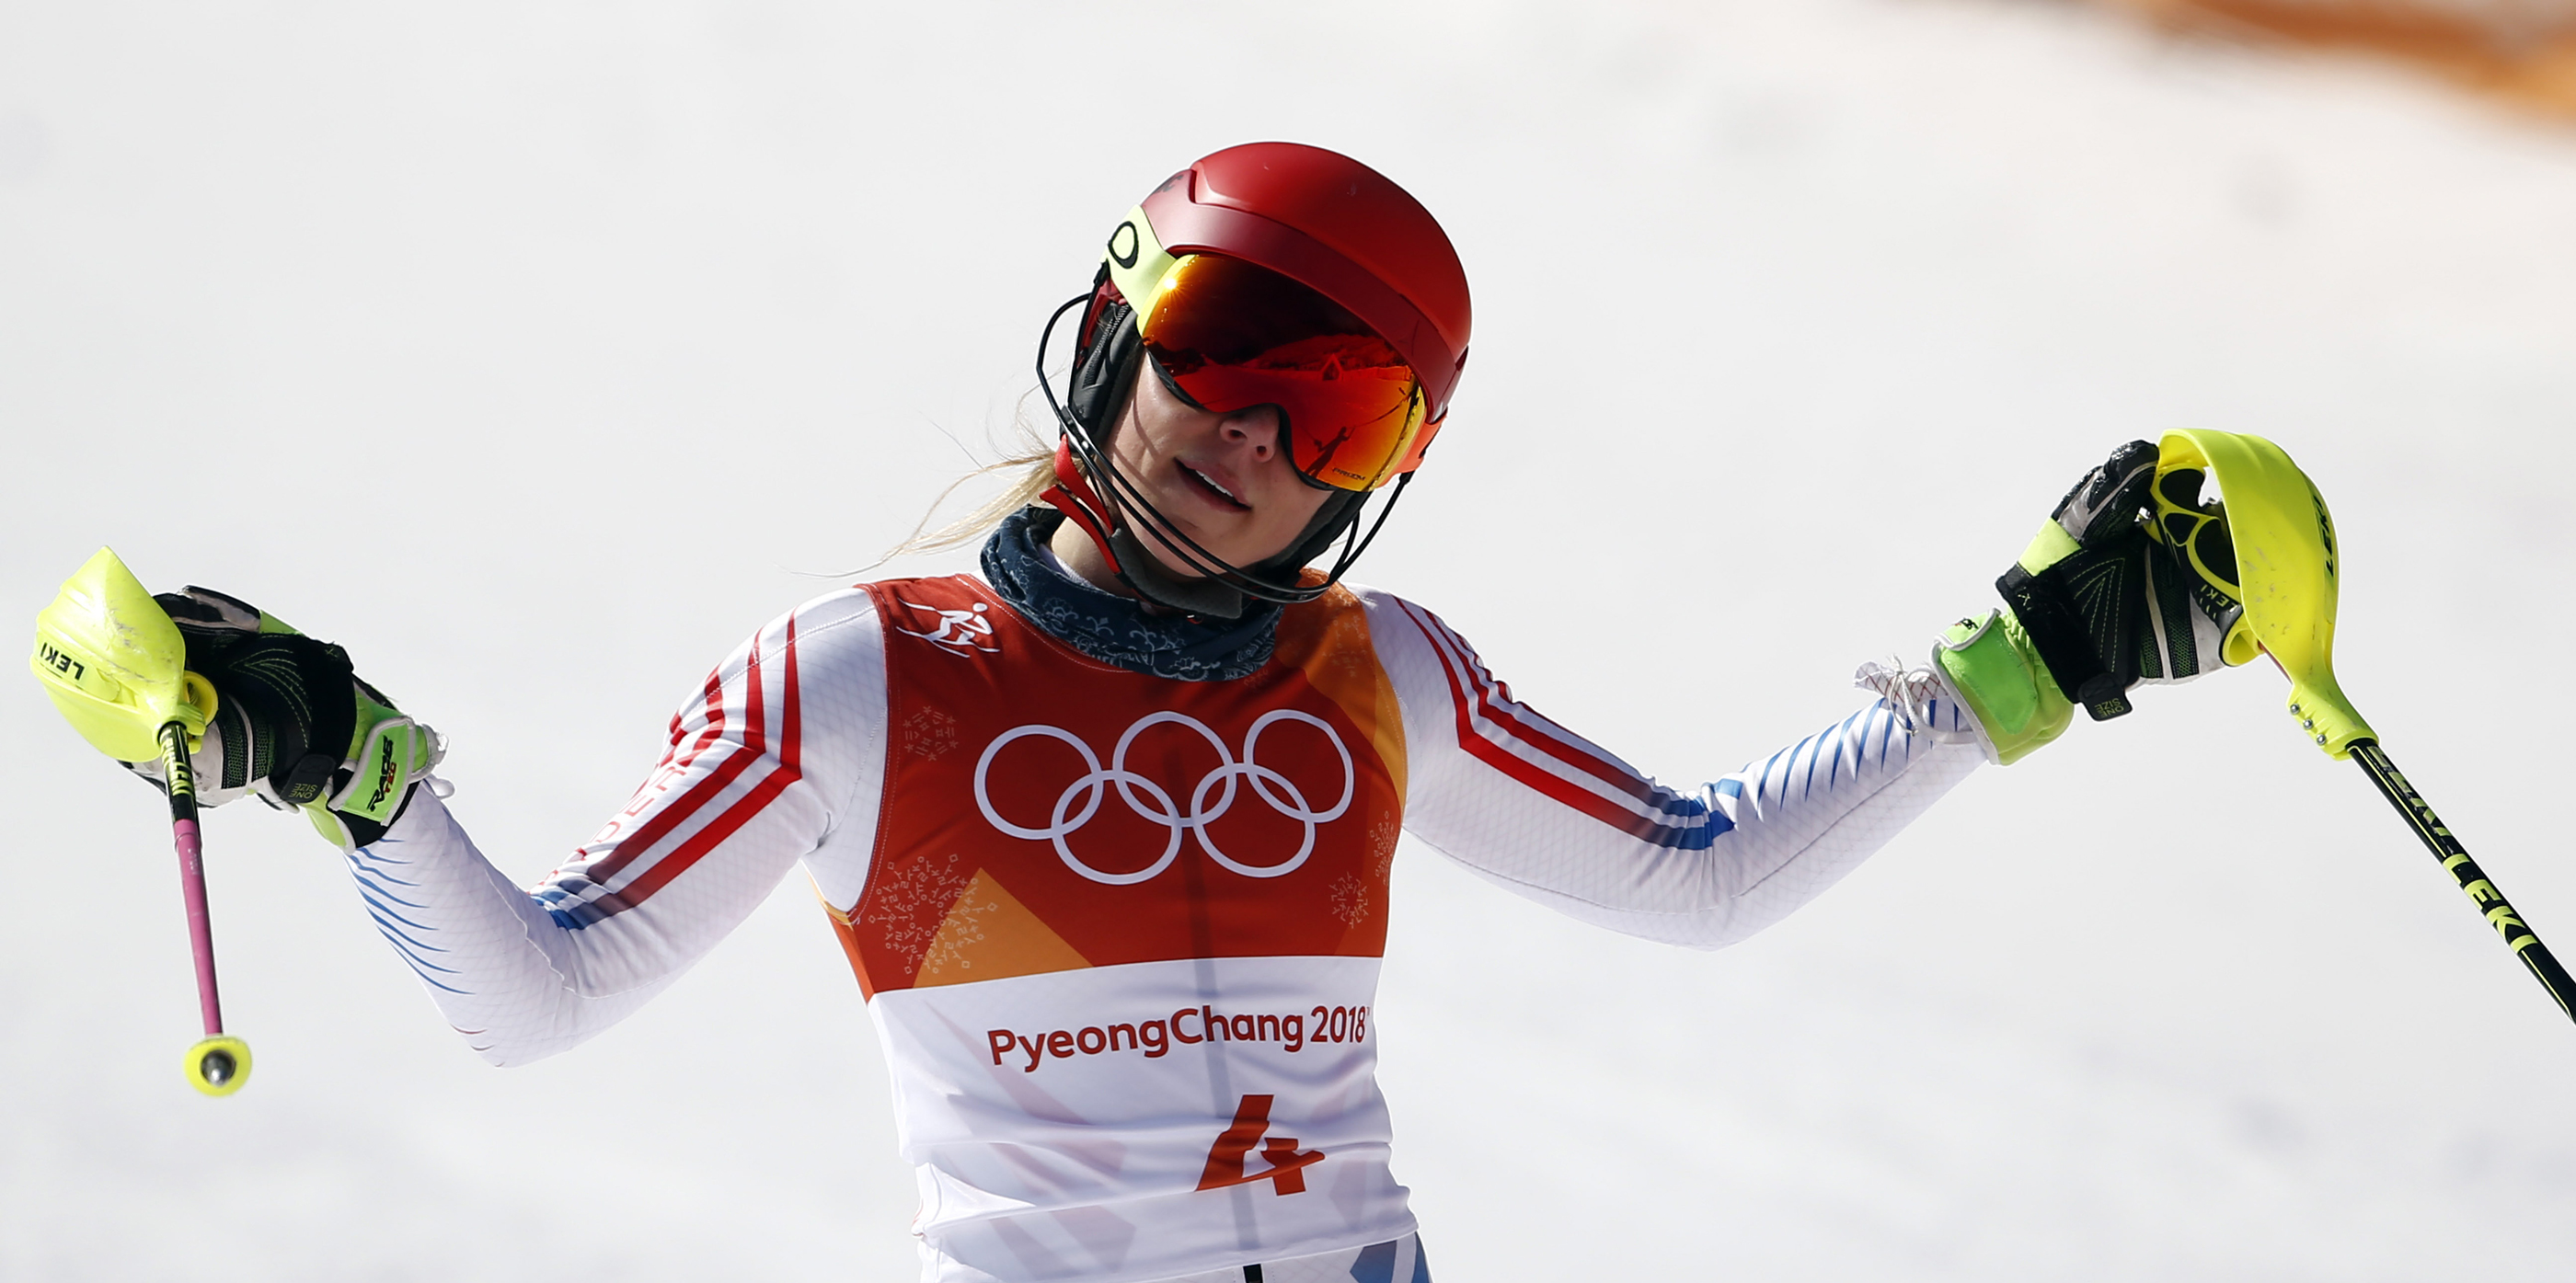 Mikaela Shiffrin reacts following her second run of slalom Friday at Yongpyong Alpine Centre. (Getty Images/Agence Zoom - Giovanni Auletta)